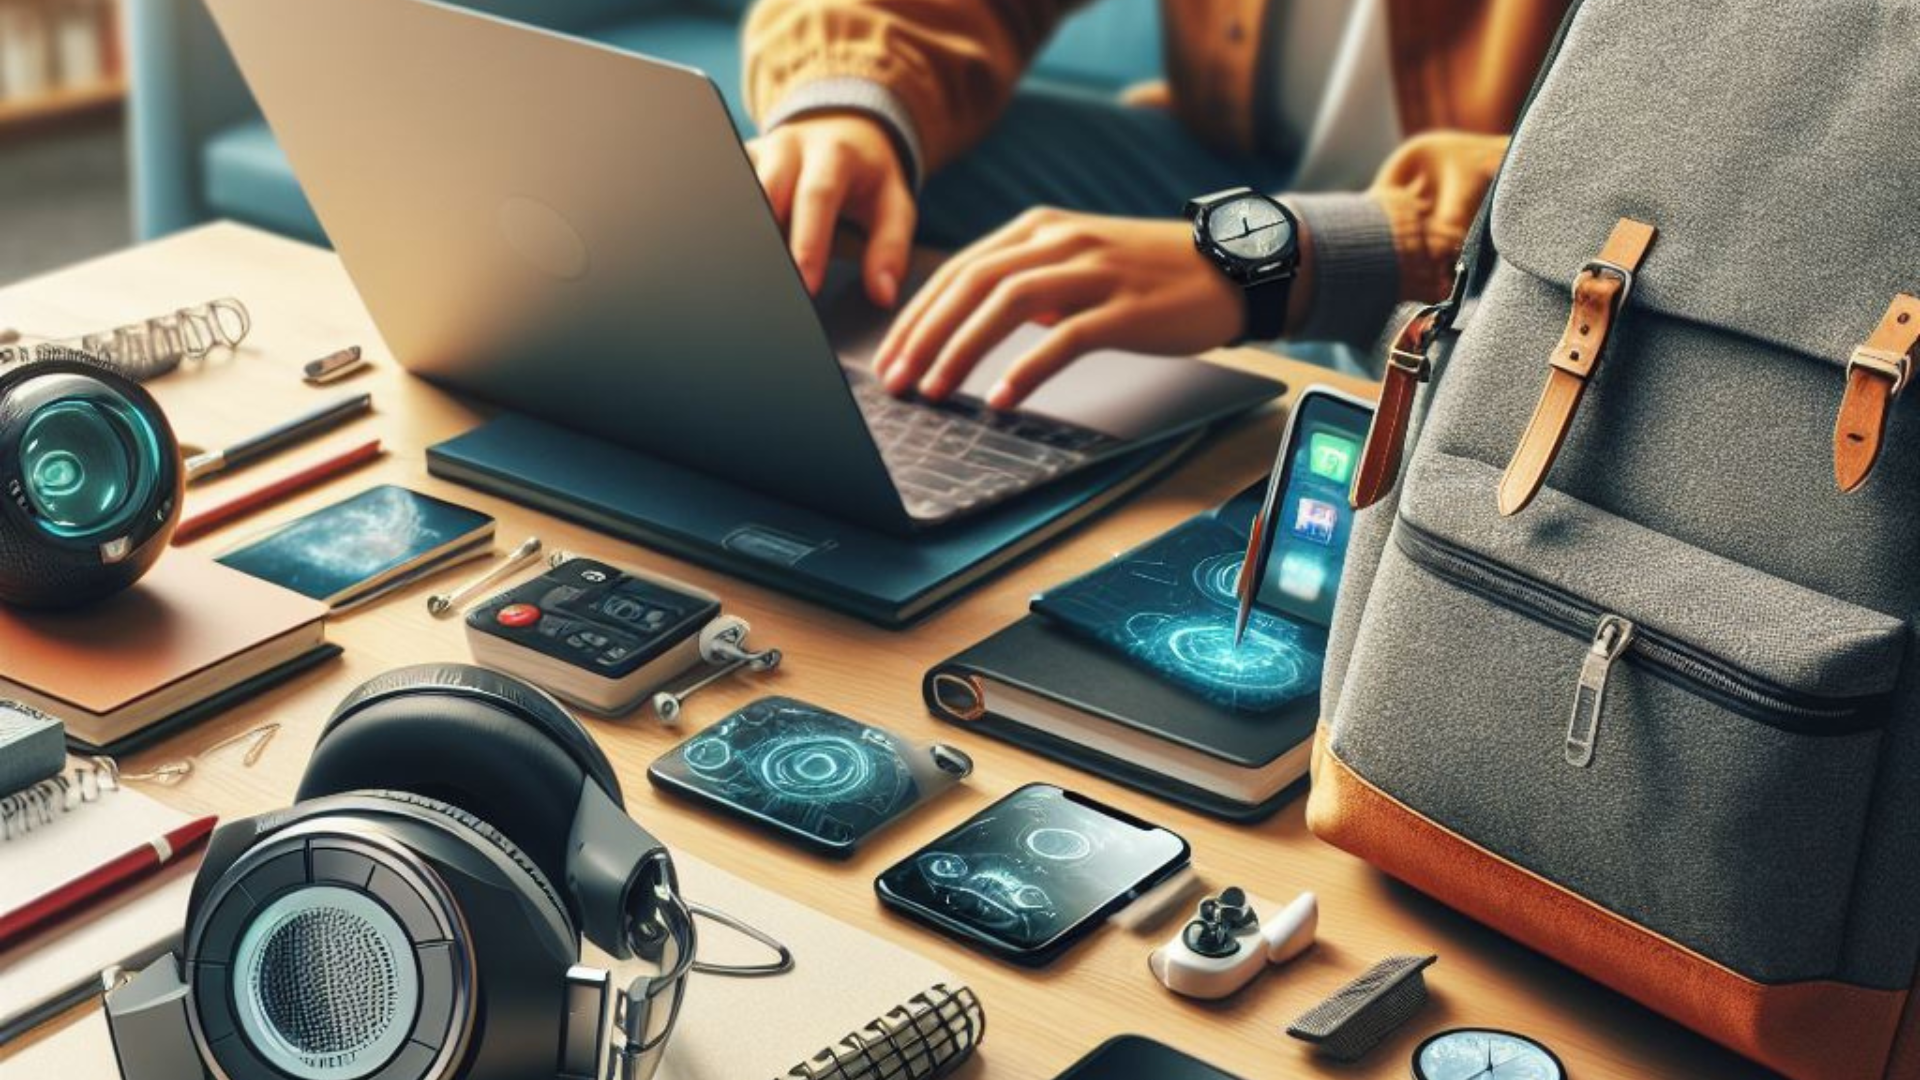 Discover essential gadgets for students in 2023 to enhance productivity and learning. From anti-theft bags to WiFi extenders.